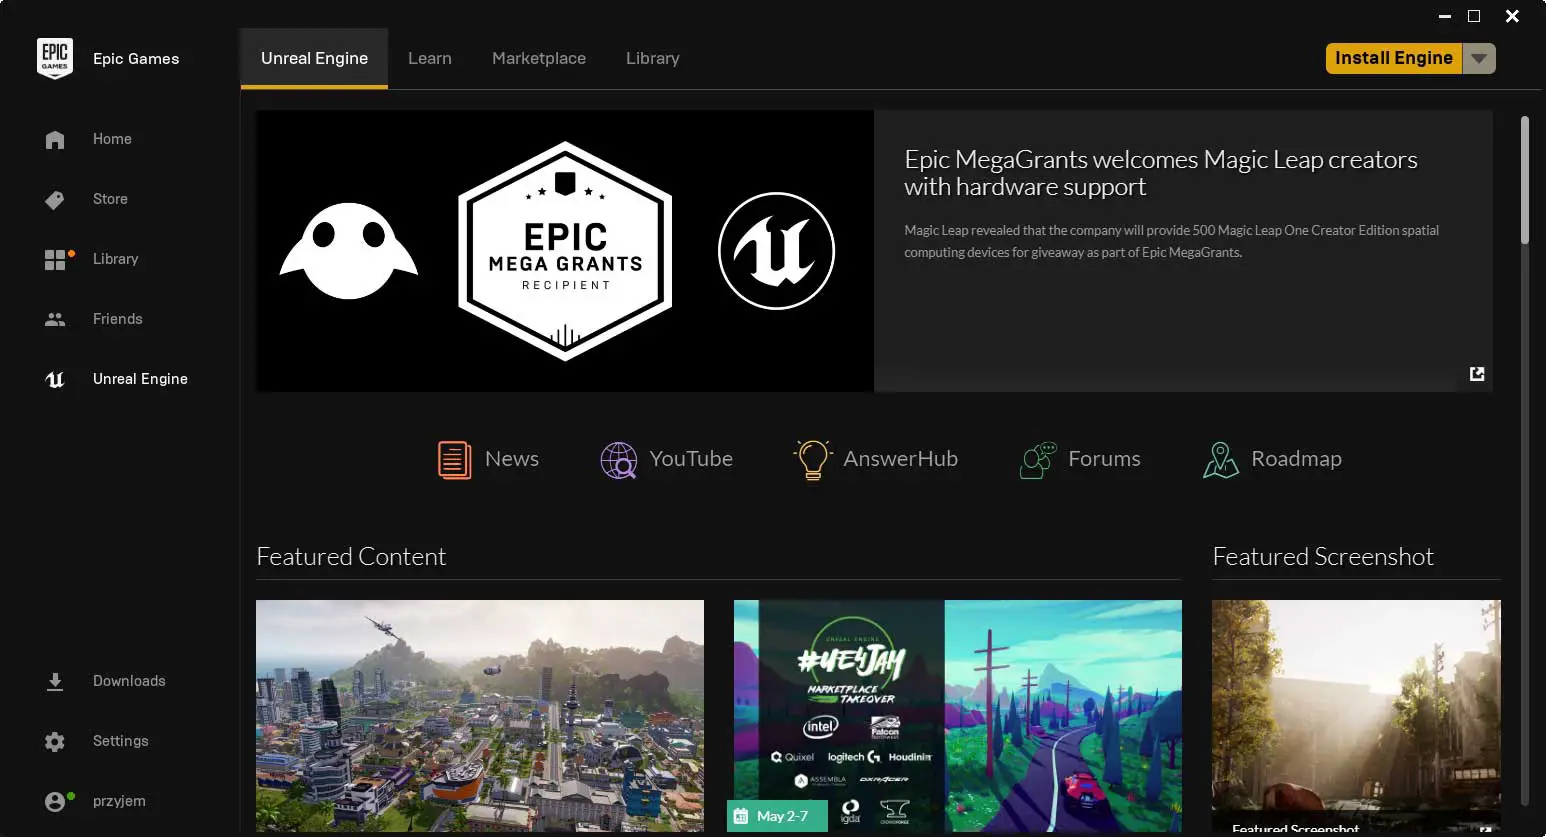 epic games launcher download